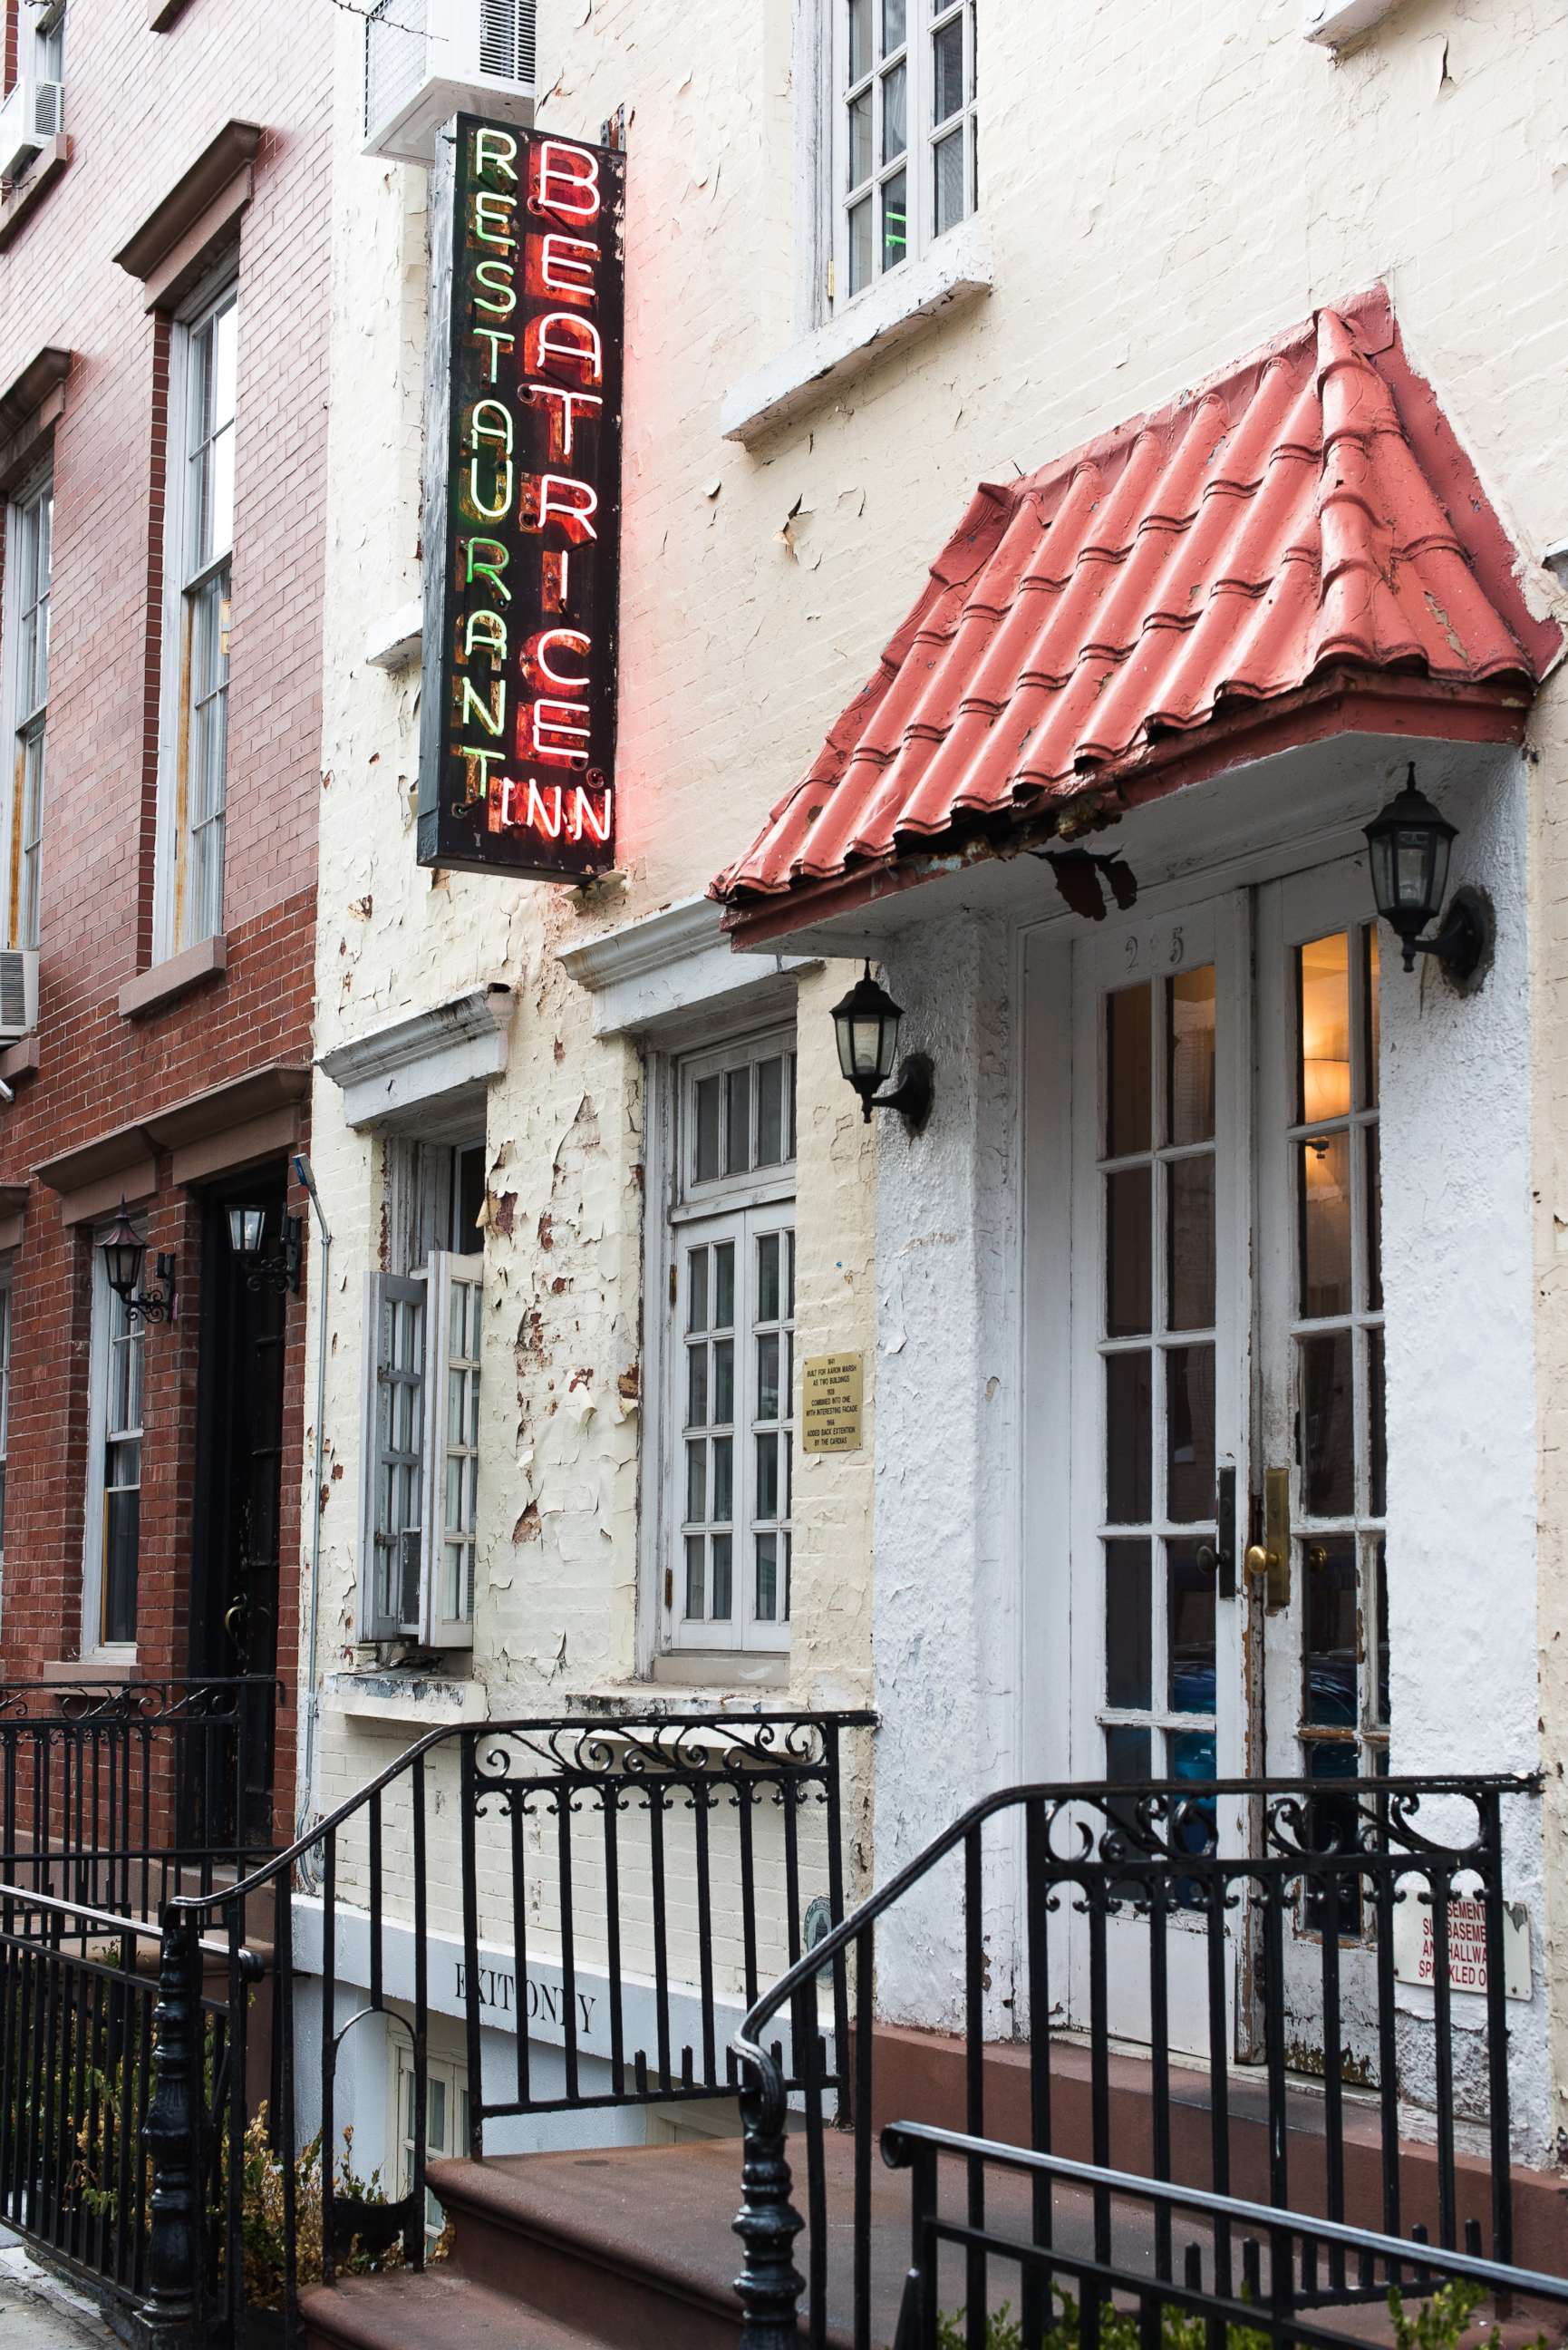 PHOTO: The Beatrice Inn in Manhattan, New York owned by Executive Chef Angie Mar.